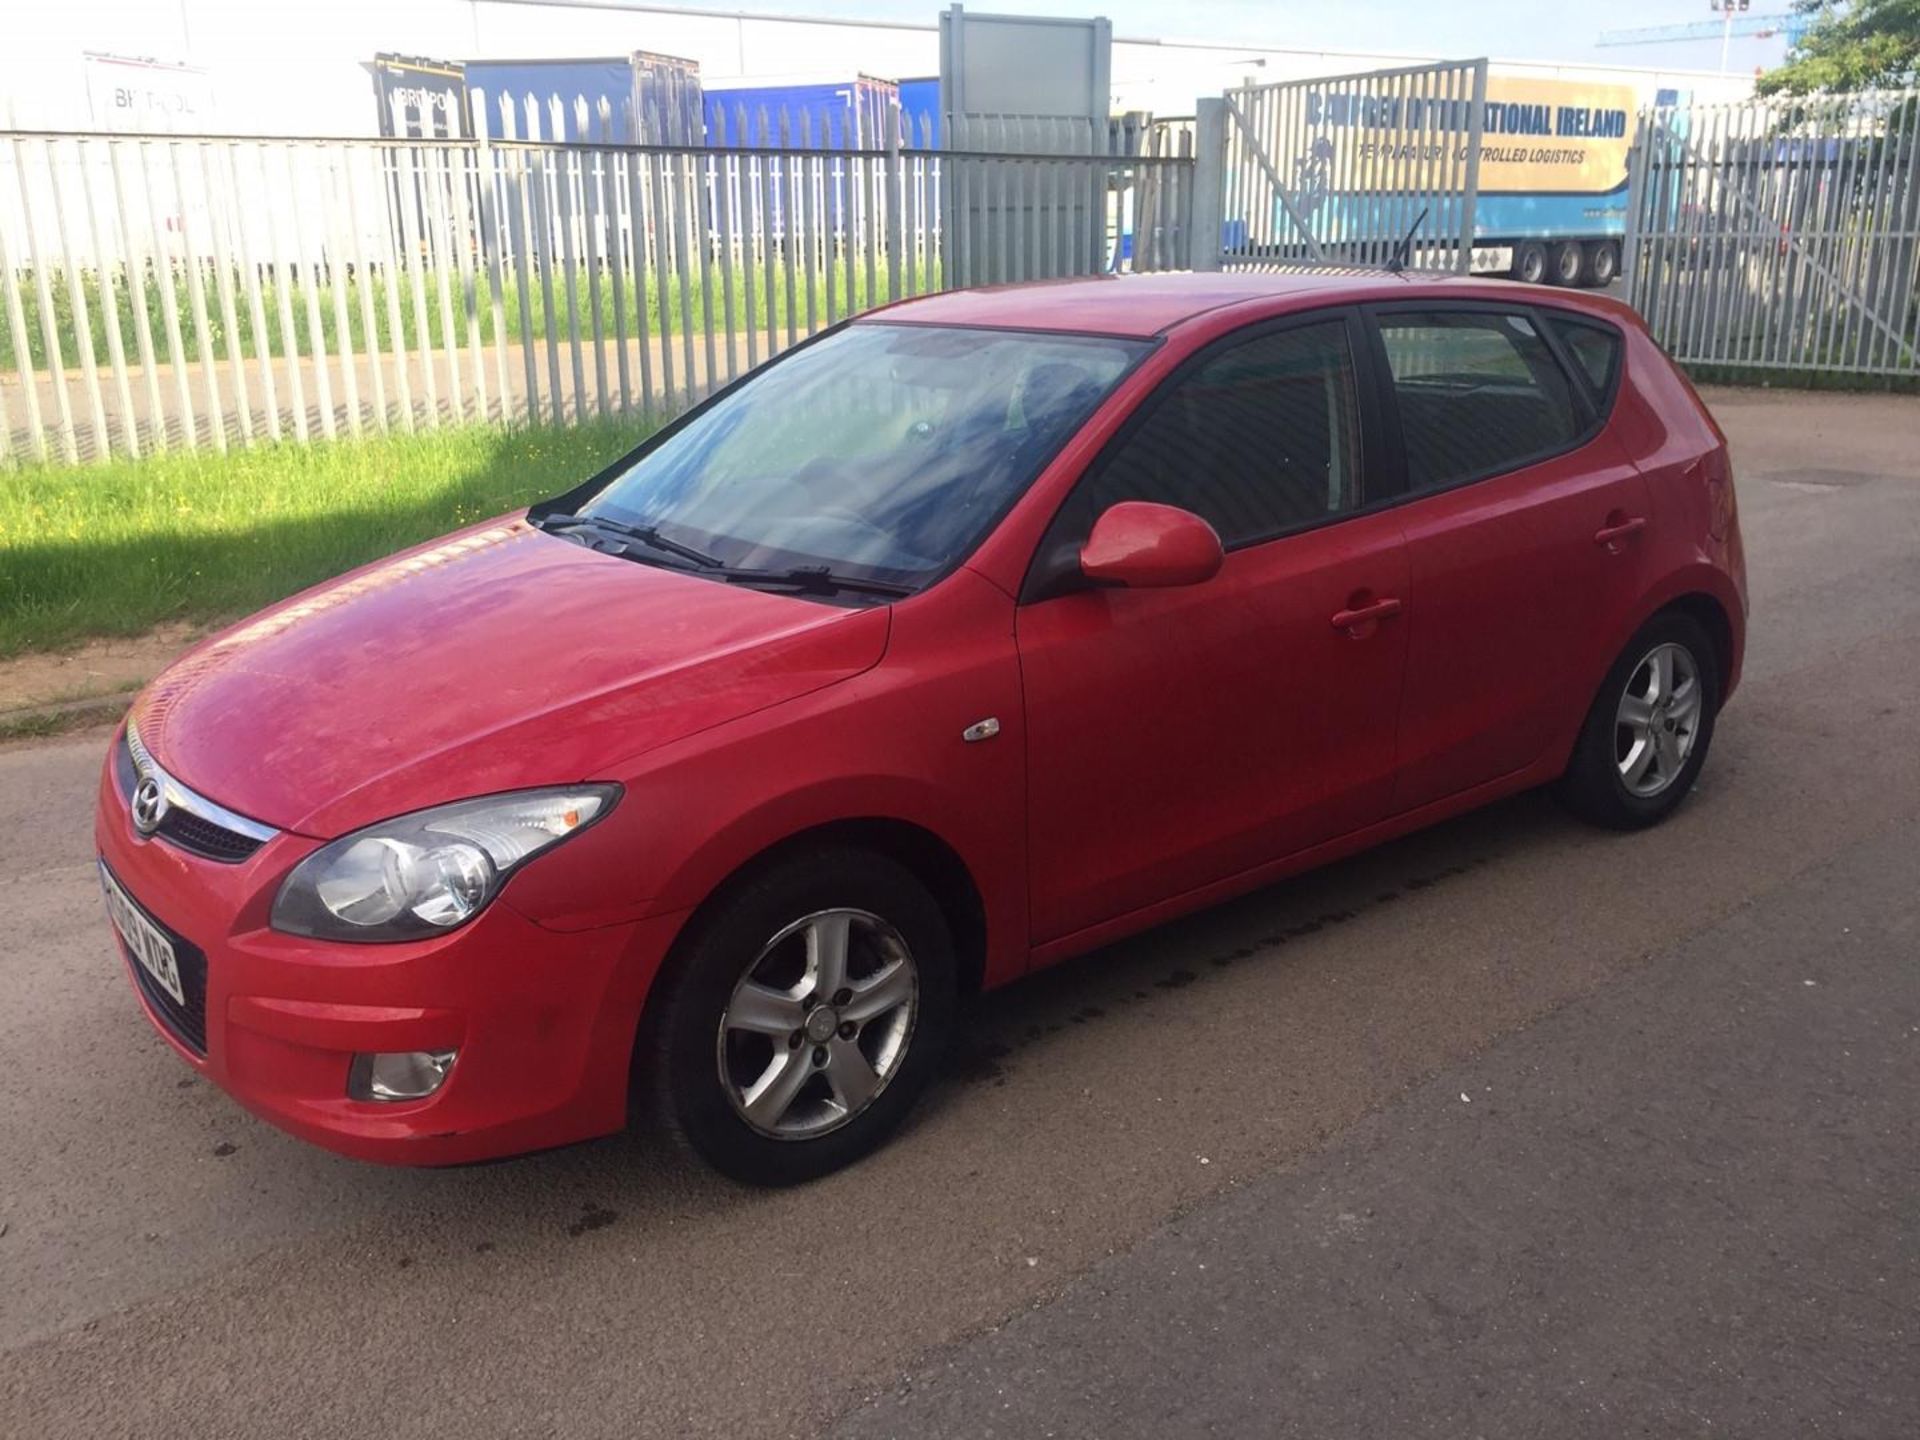 2009 Hyundai i30 Comfort 1.6 Petrol - CL505 - NO VAT ON THE HAMMER - Location: Corby - Image 10 of 11